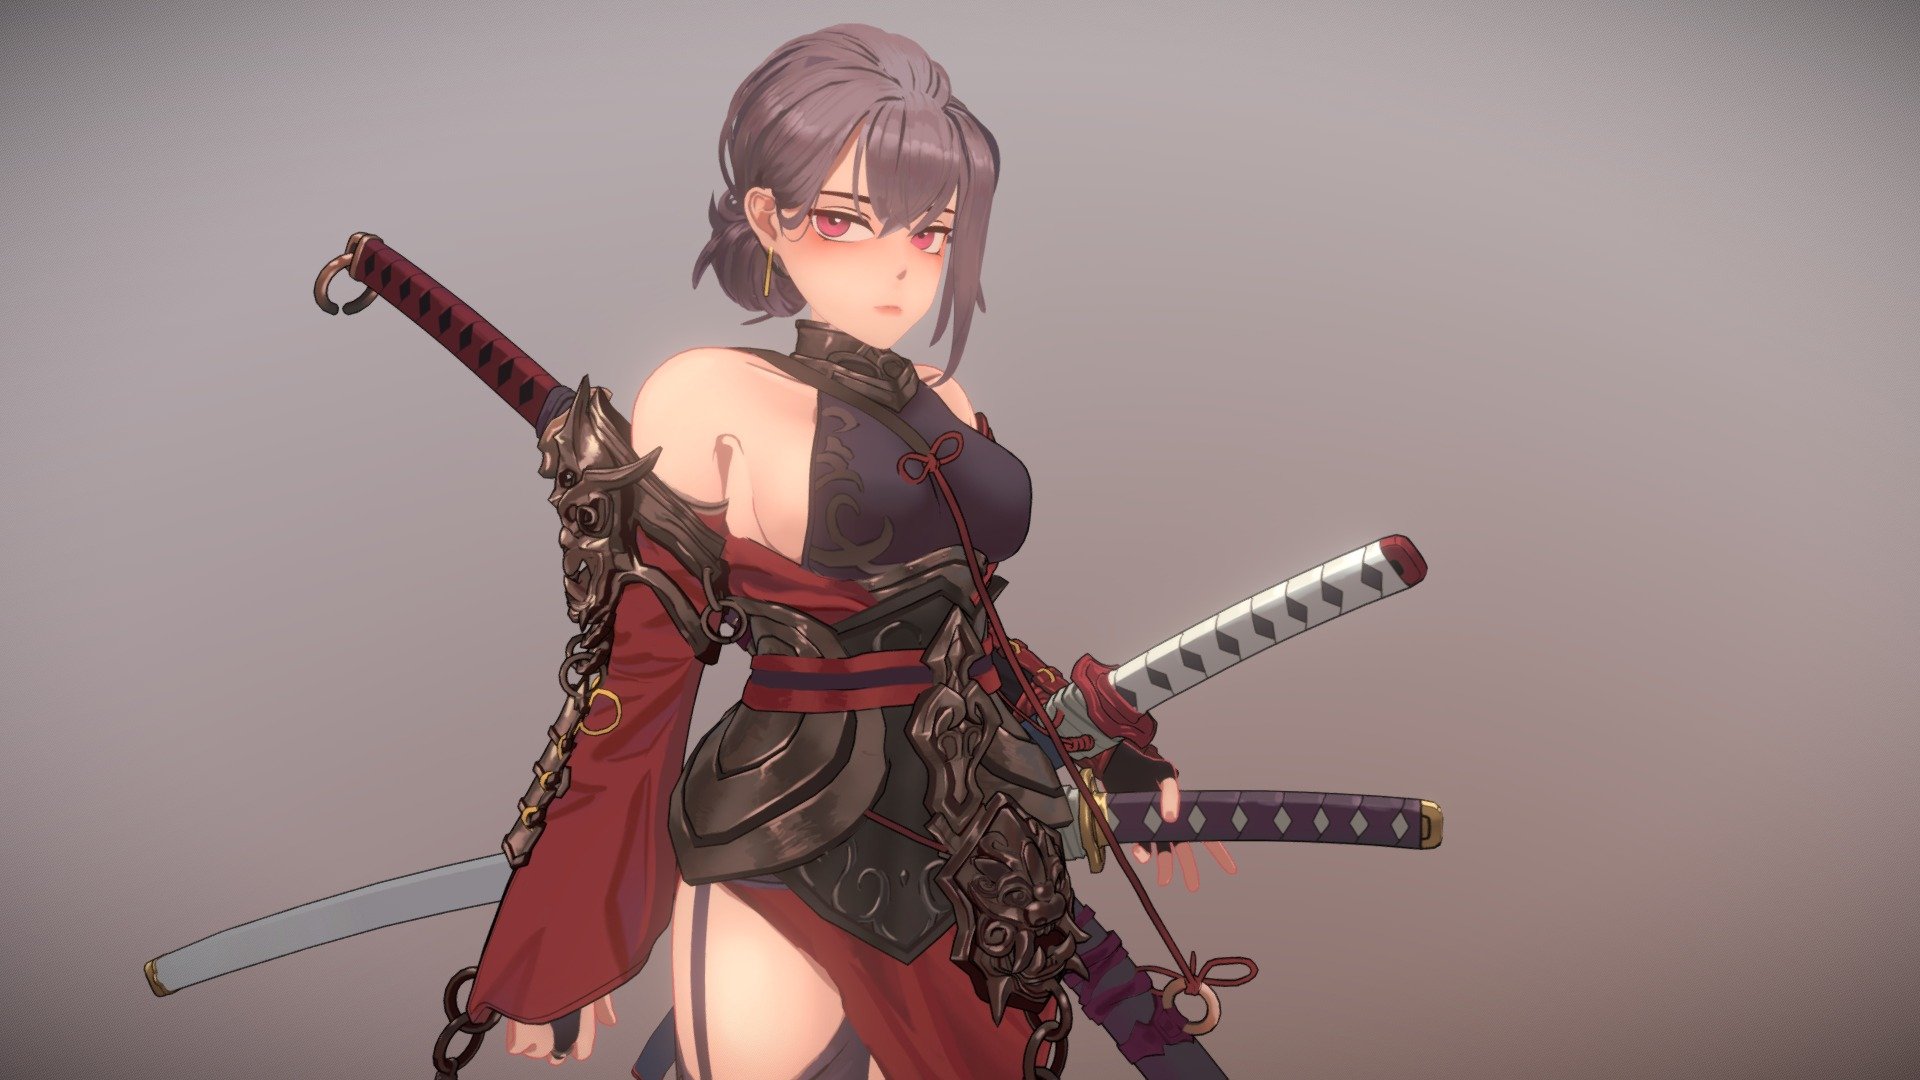 3D Samurai Girl from a very talented character concept artist. While working on her, I've just realised how detailed and amazing the character is.
All credits goes to D-pin [https://www.artstation.com/artwork/r9wd96]

Check out the other characters on Artstation, they all look so gorgeous and now I'm a big fan!
[https://www.artstation.com/dpin]

 - Samurai Girl - 3D model by Artical 3d model